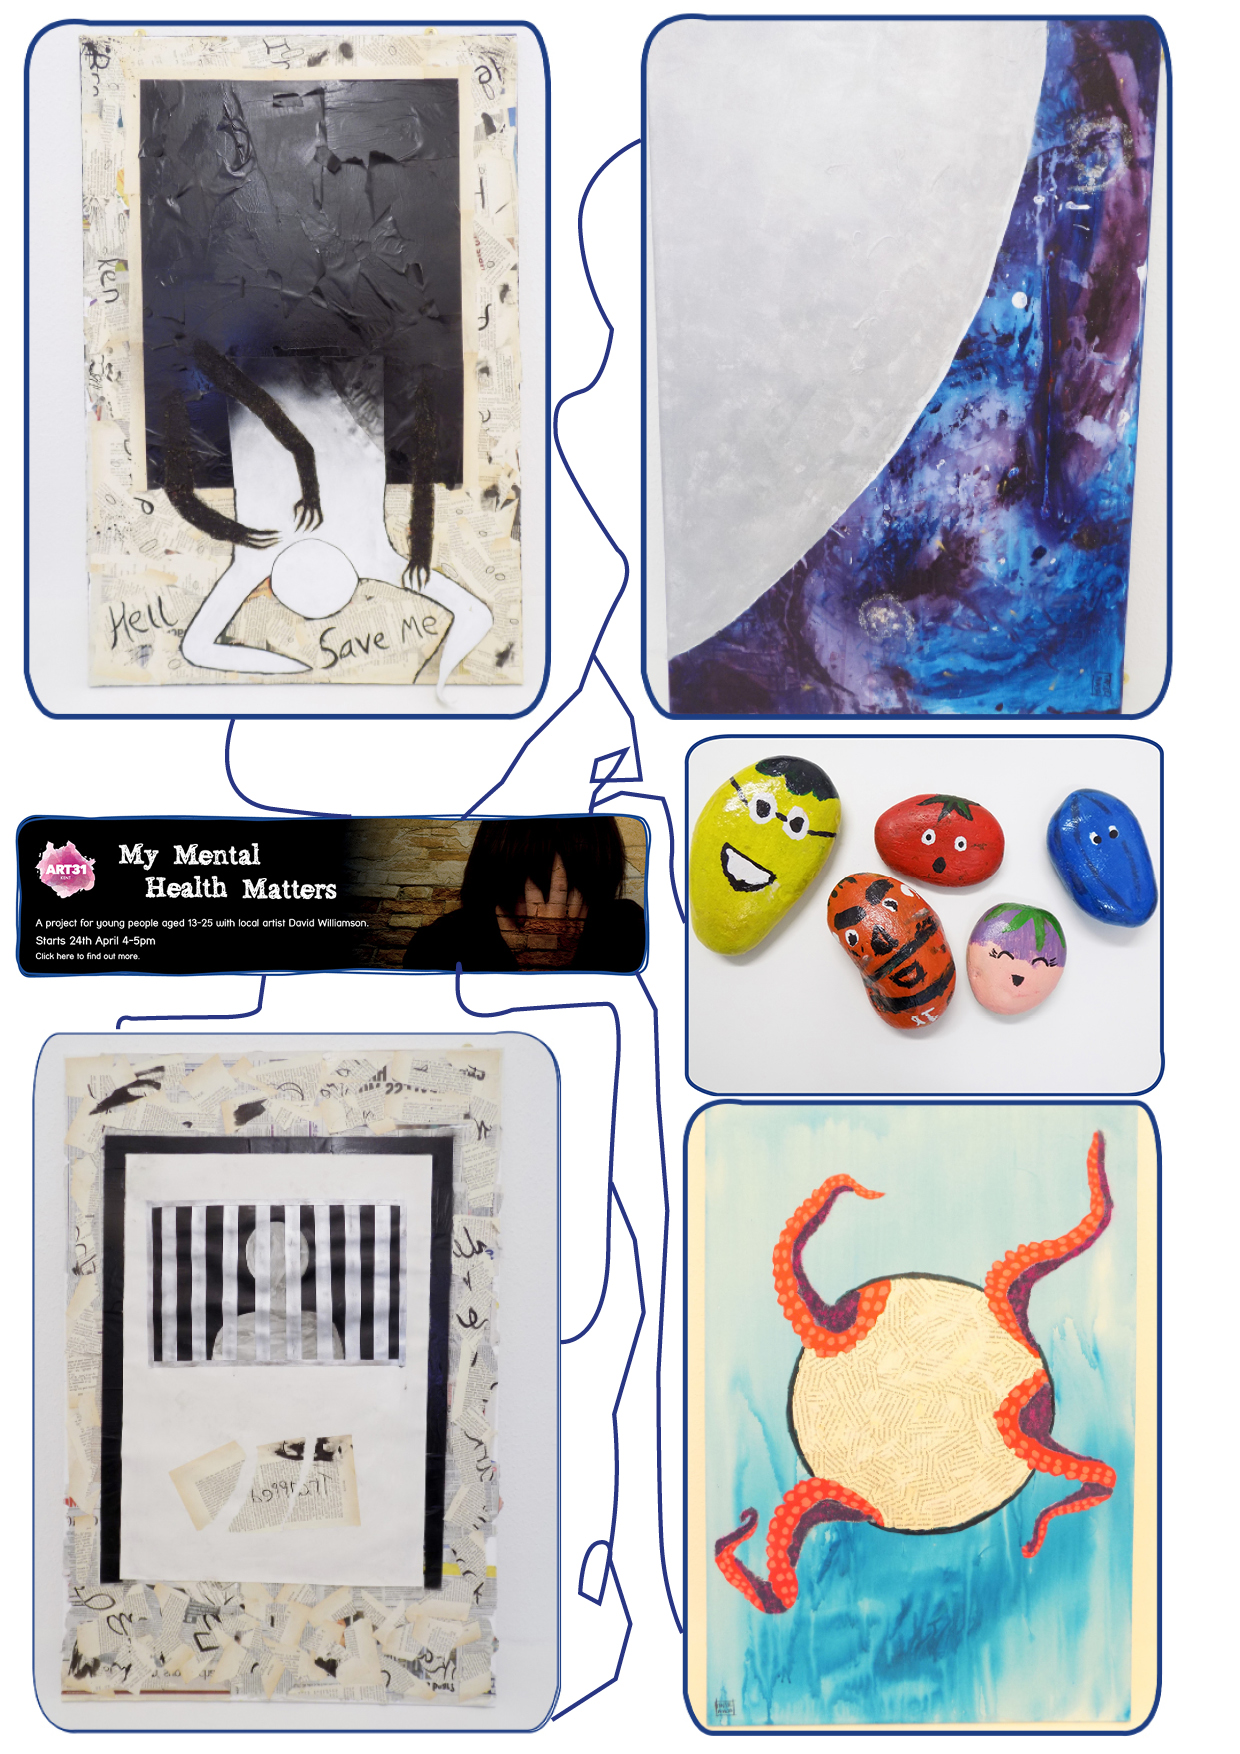 This image shows some of the artwork created as part of the Art 31 Programme. The different formats of artwork here show things such as human figures, painted pebbles, newspaper-stylized artwork.